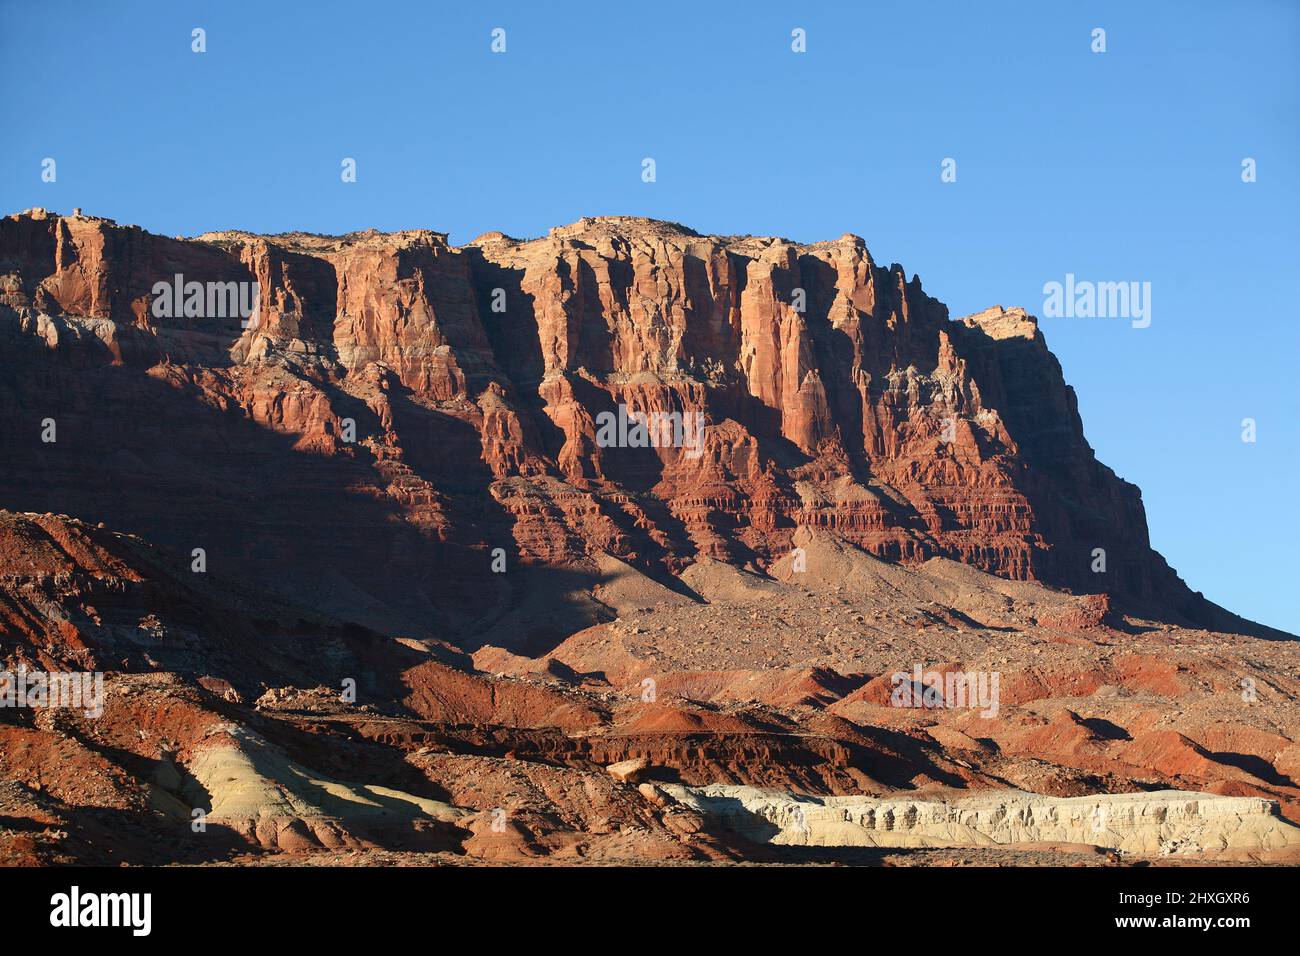 view of Vermilion Cliffs National Monument along Arizona highway 89A Stock Photo